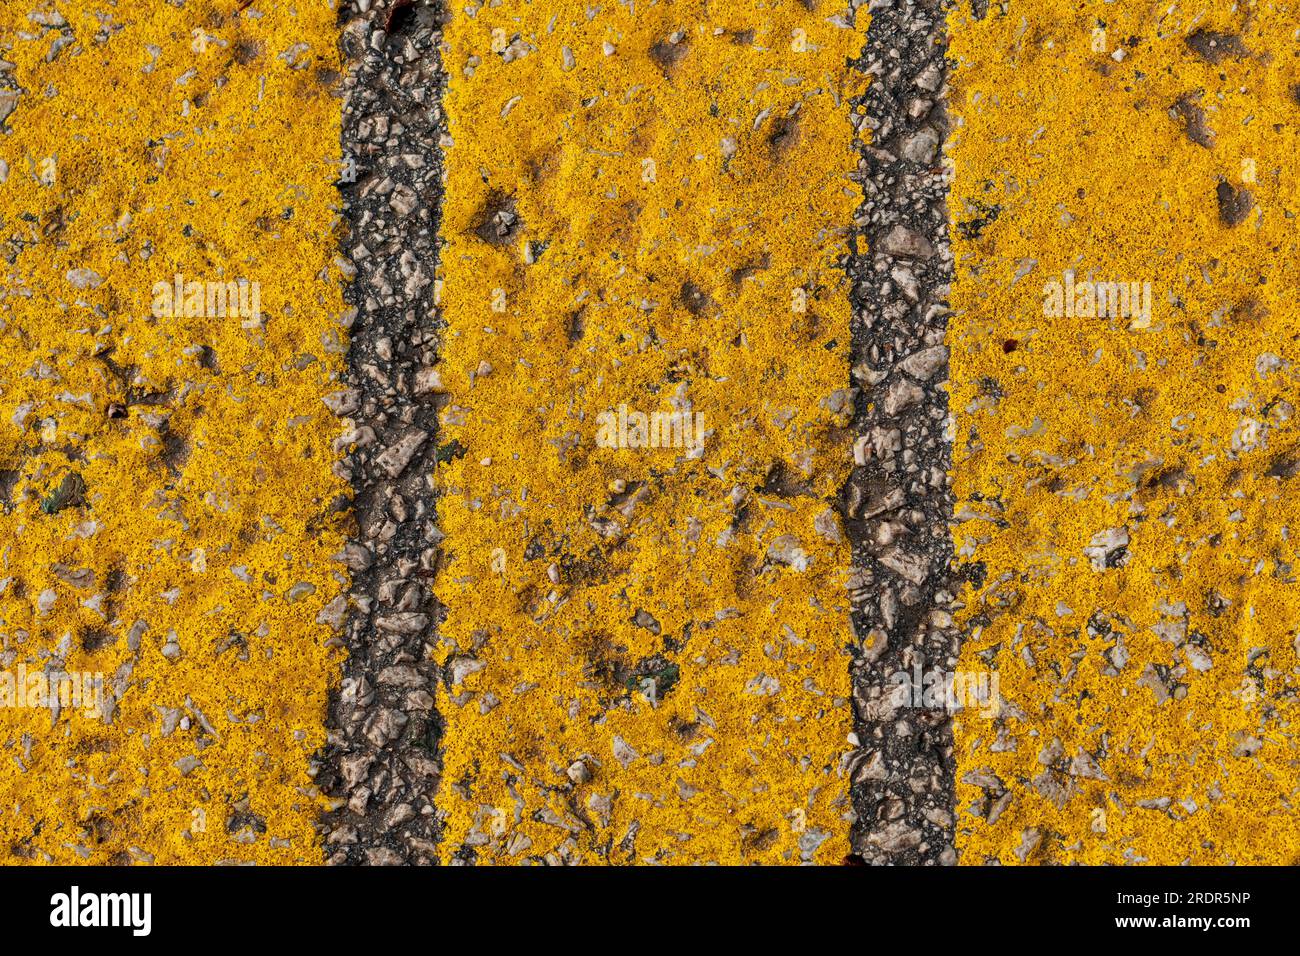 Yellow strip pattern on asphalt road as abstract background, top view Stock Photo